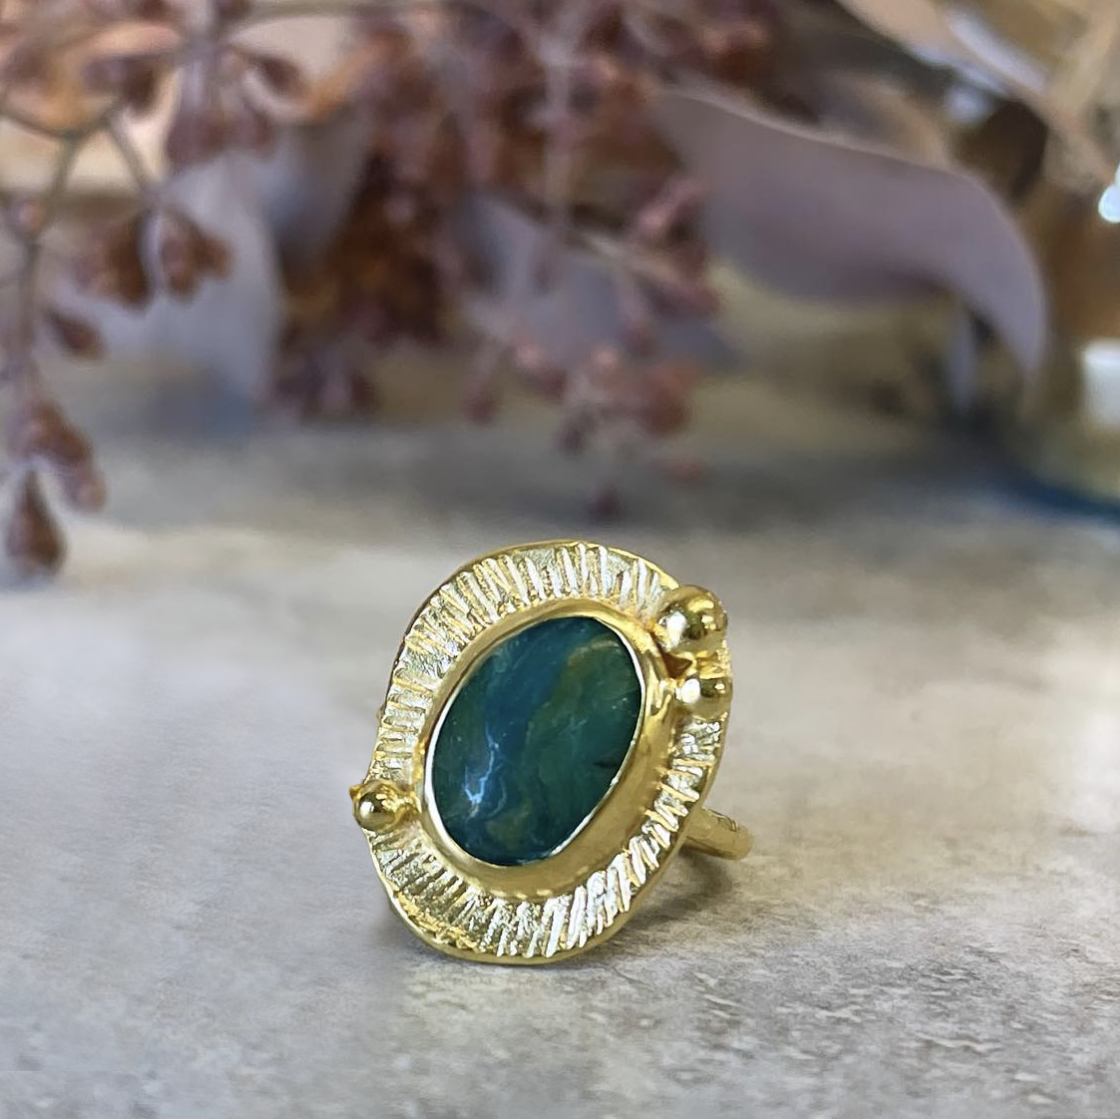 One-of-a-Kind Peruvian Opal Cocktail Ring